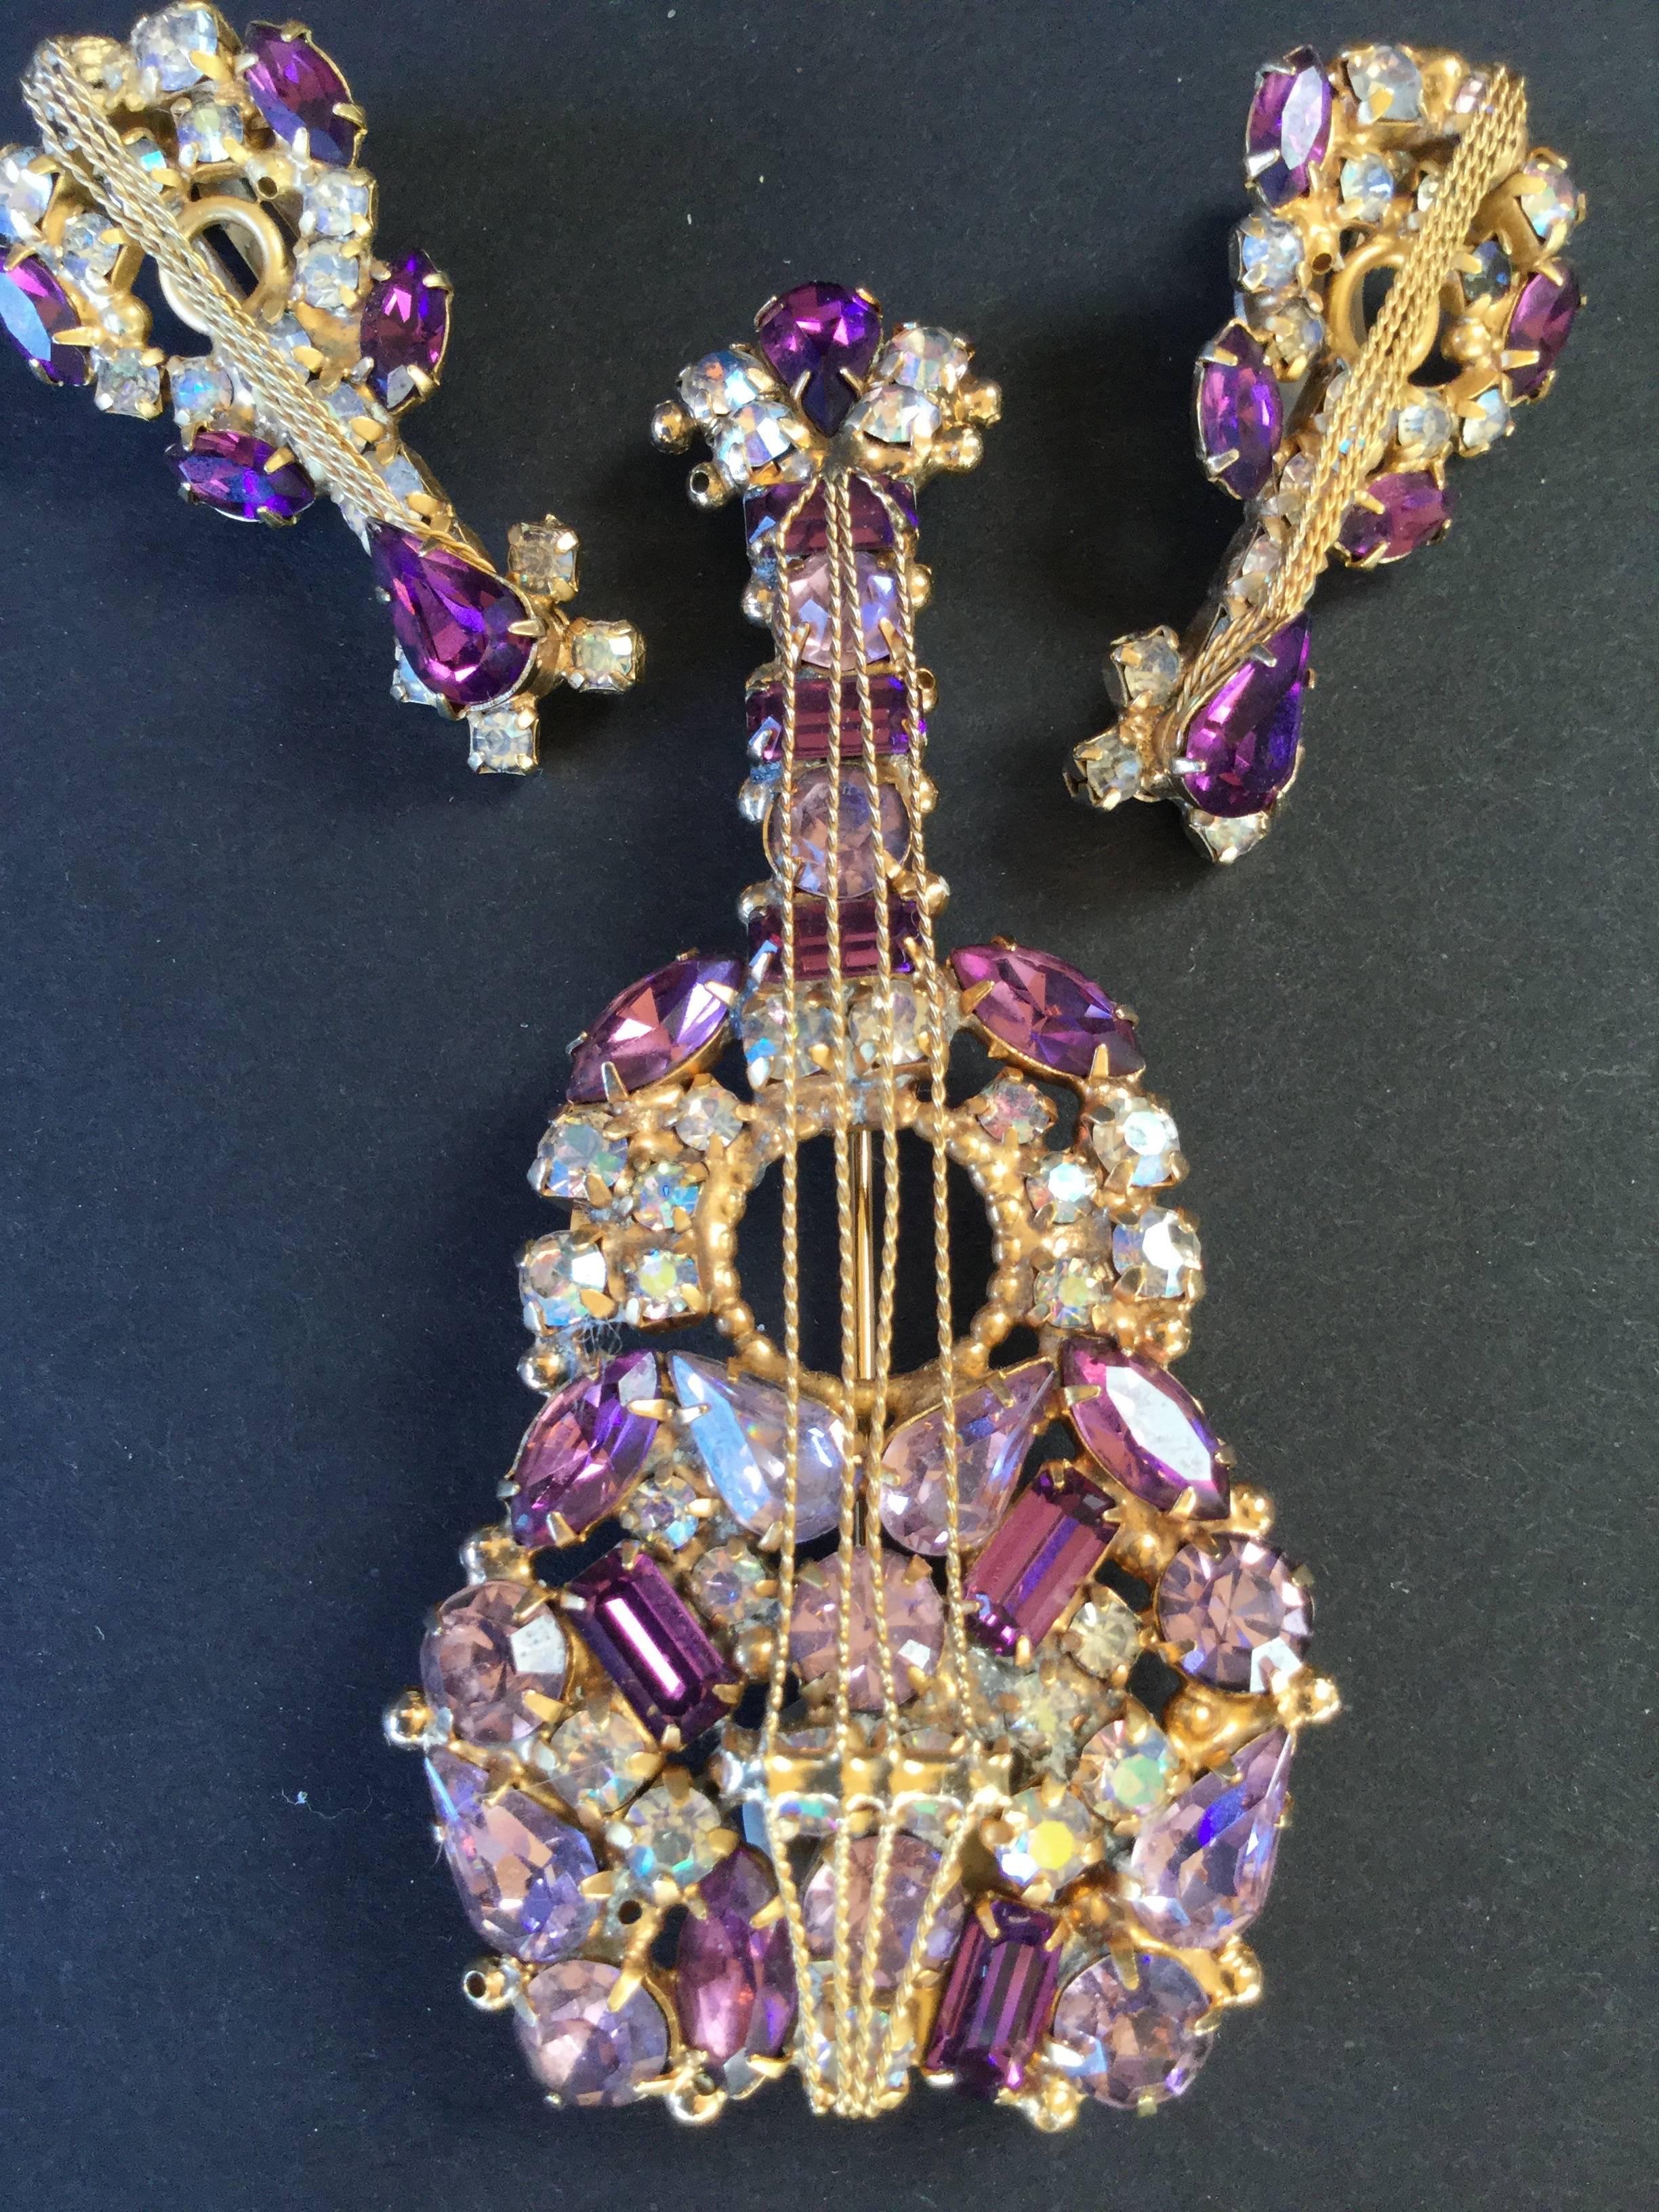 Rare, Original by Robert, guitar or cello brooch and earring set. These come from a limited edition series of musical instruments including harps, guitars, cellos, and banjos which Robert Levy designed and produced from 1945 to the early 1950's for